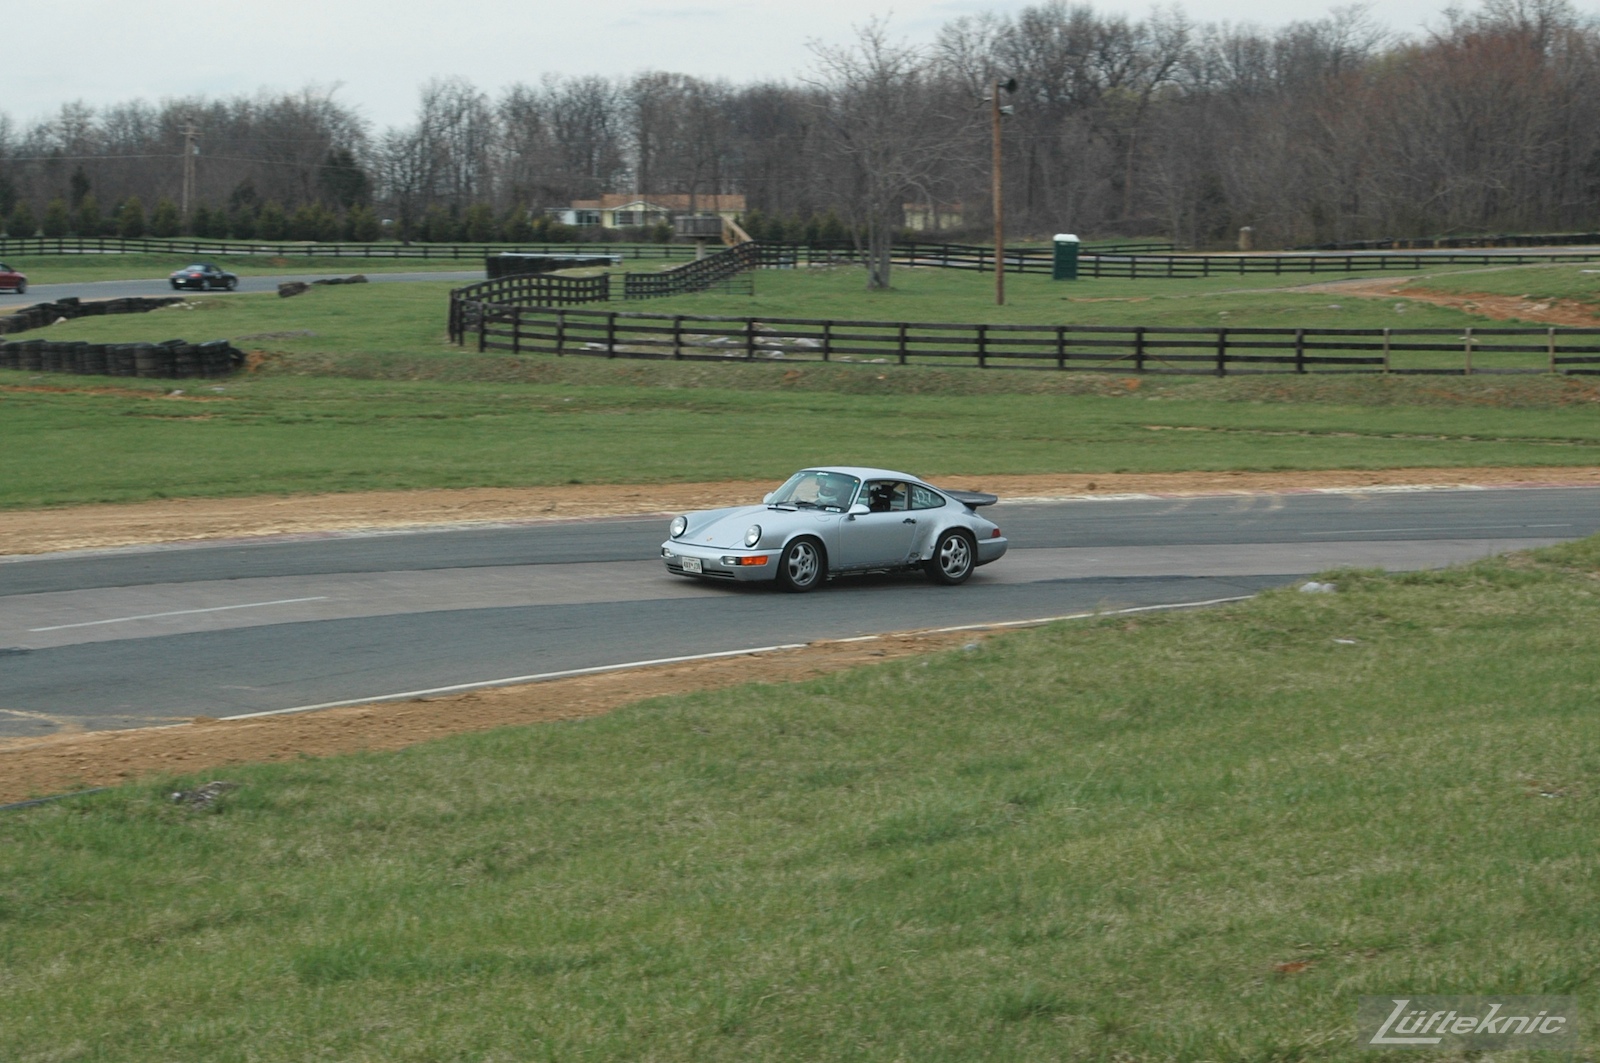 The 964 RS America on track for the first time after the accident going around a left hand corner.